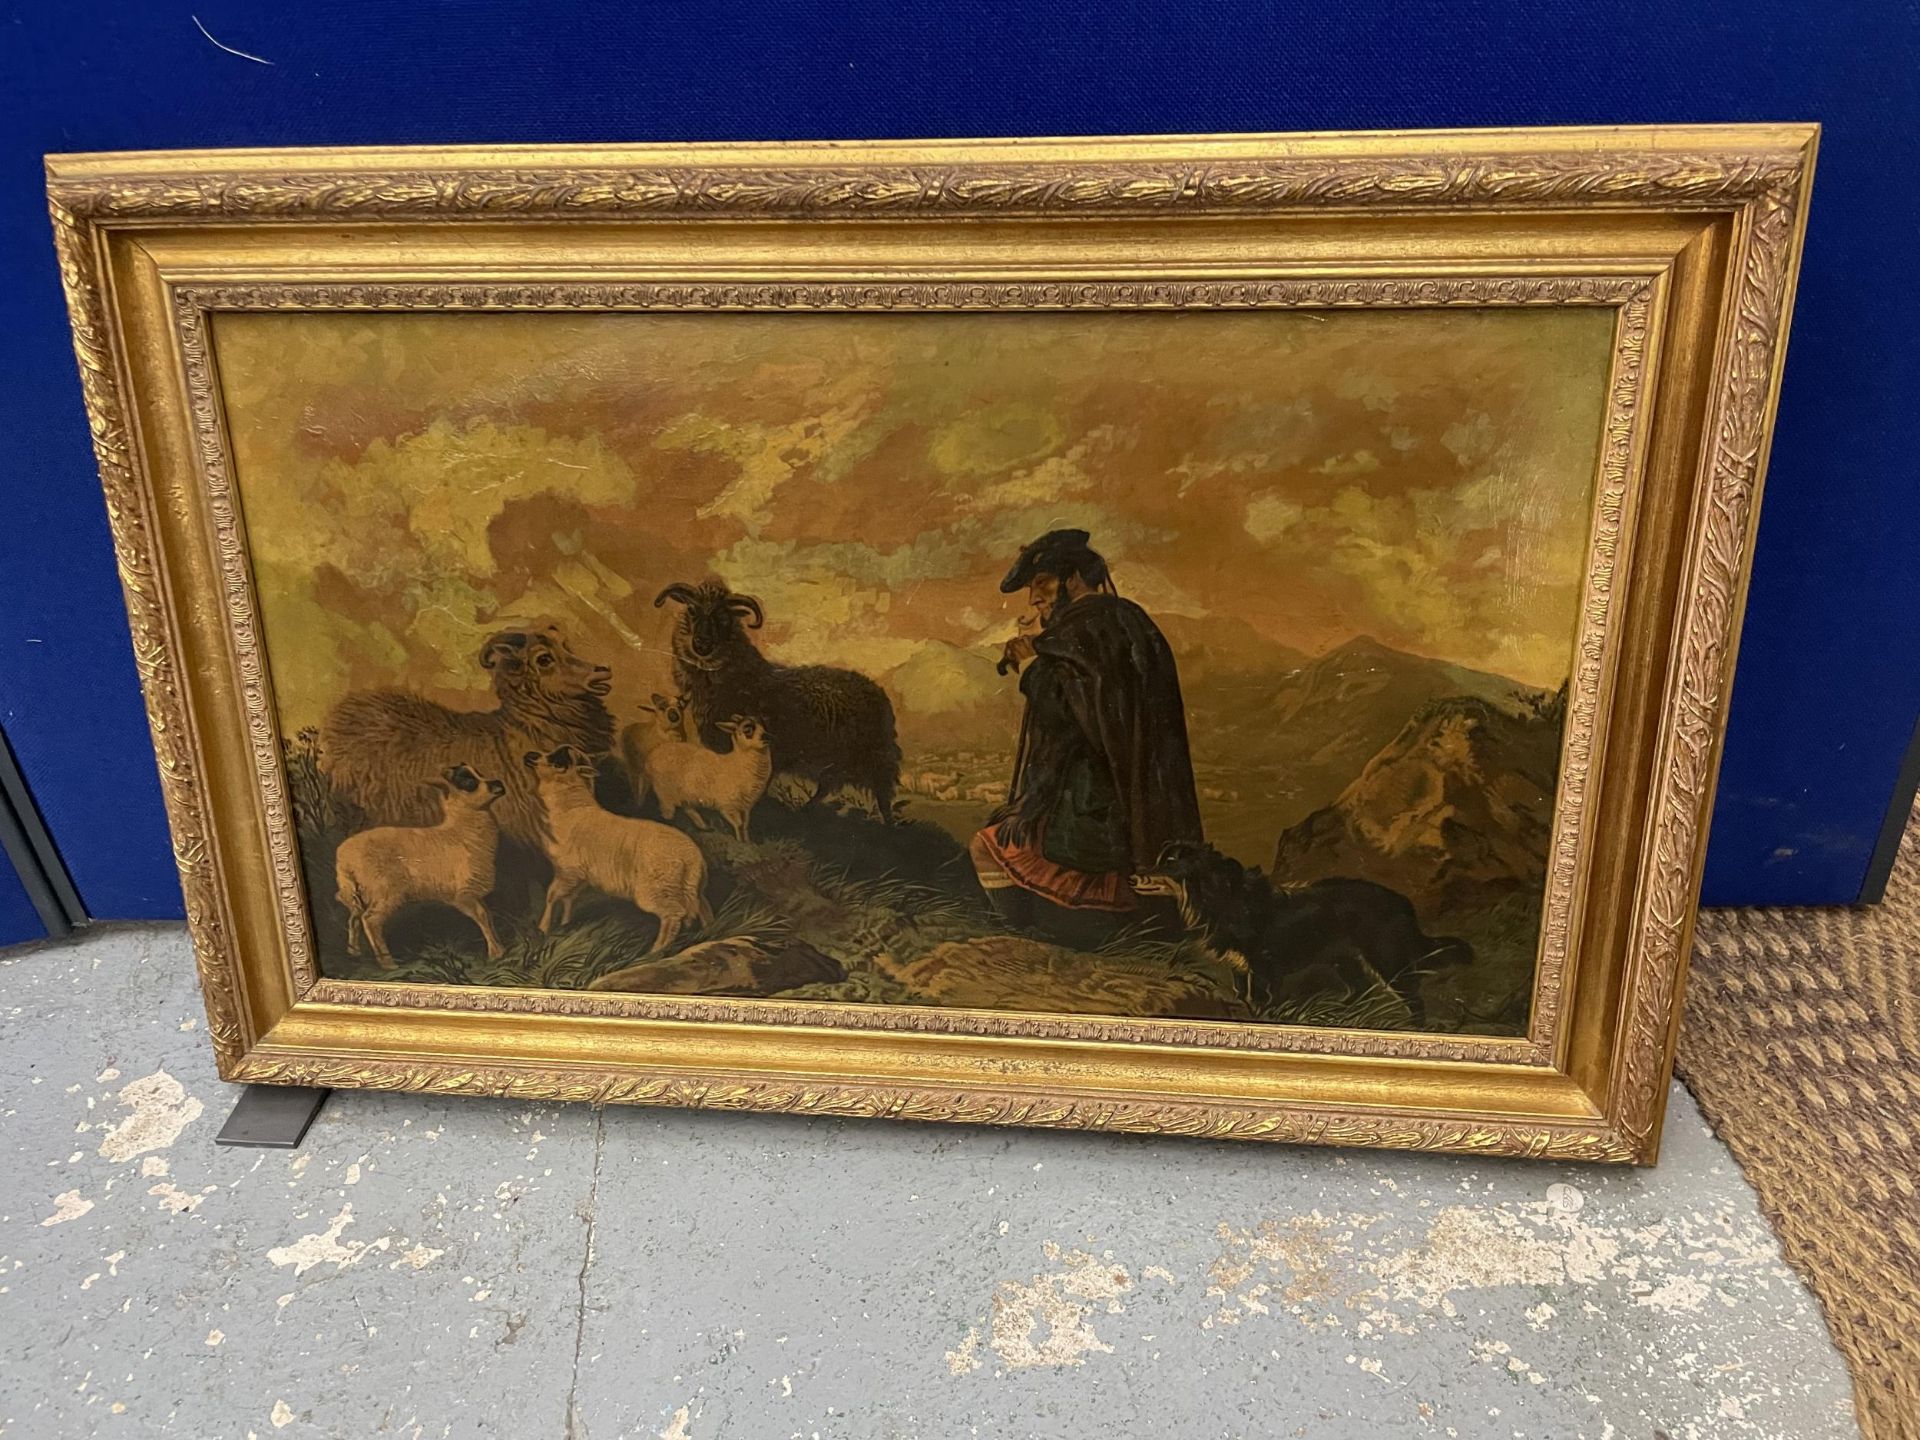 A BELIEVED VICTORIAN OLEOGRAPH OF A SCOTTISH SHEPHERD WITH SHEEP ON A MOUNTAINSIDE IN A GILT FRAME